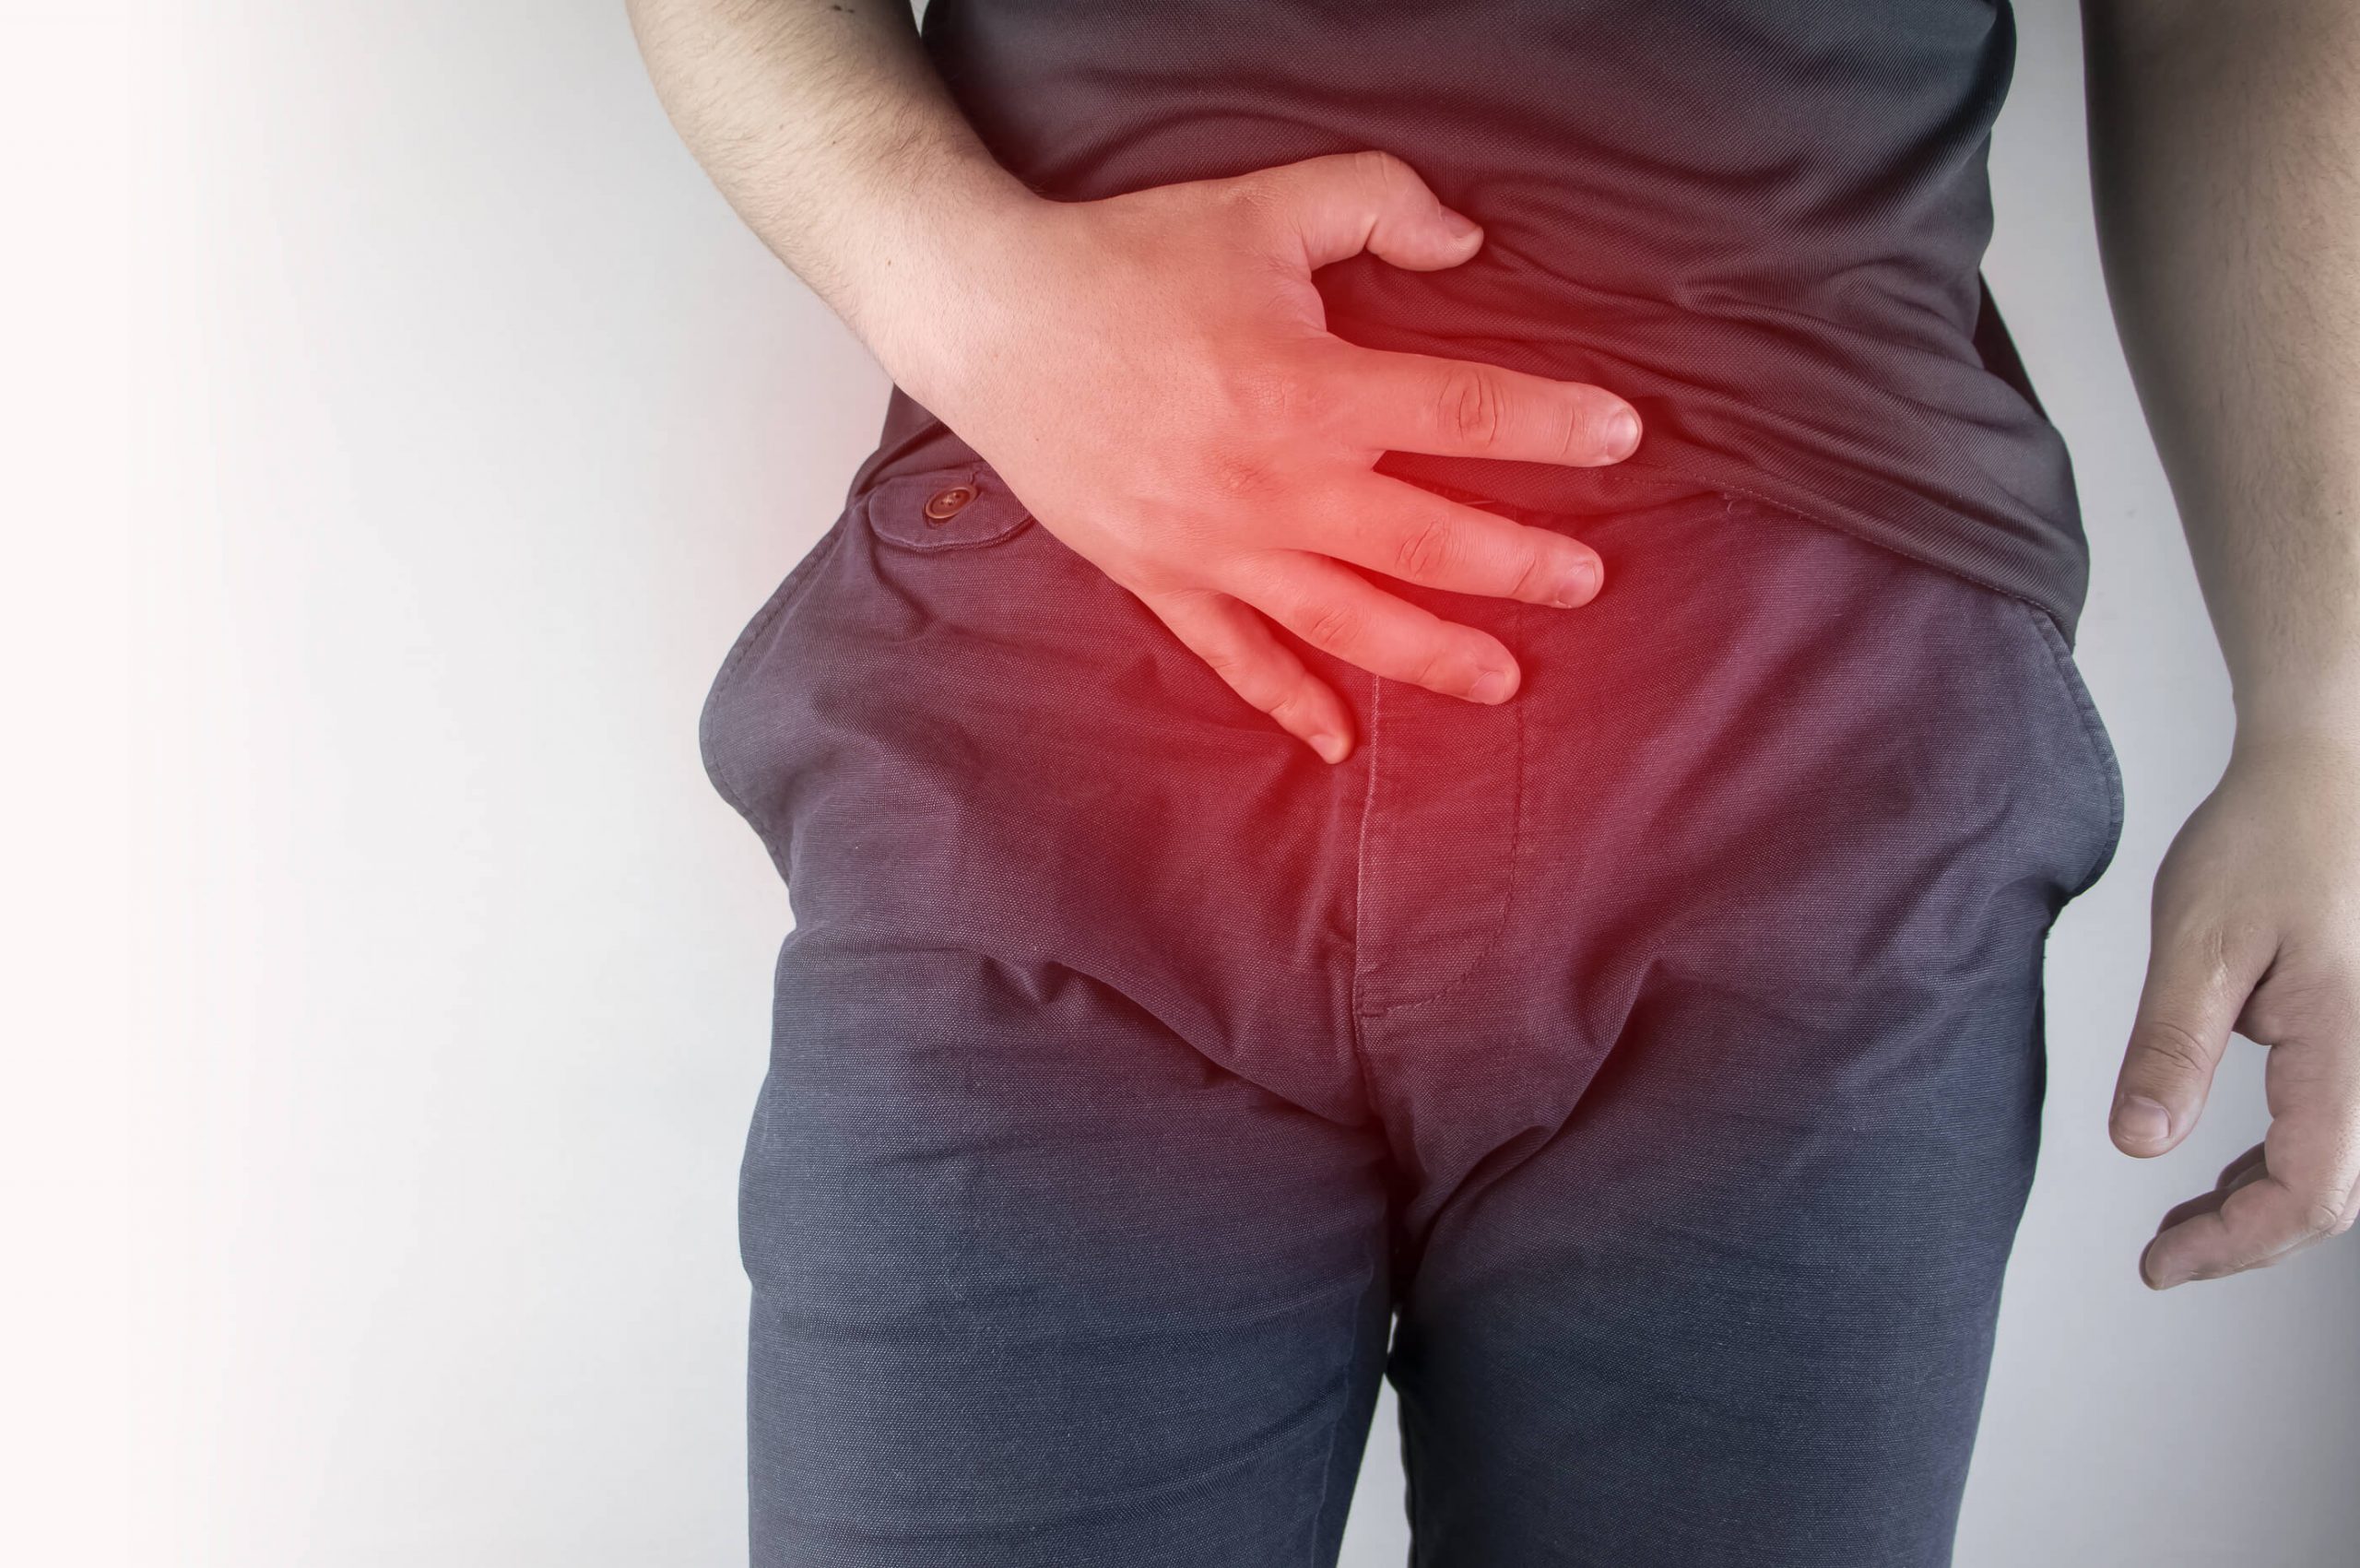 10 Tips to Keep Your Bladder Healthy - Advanced Urology